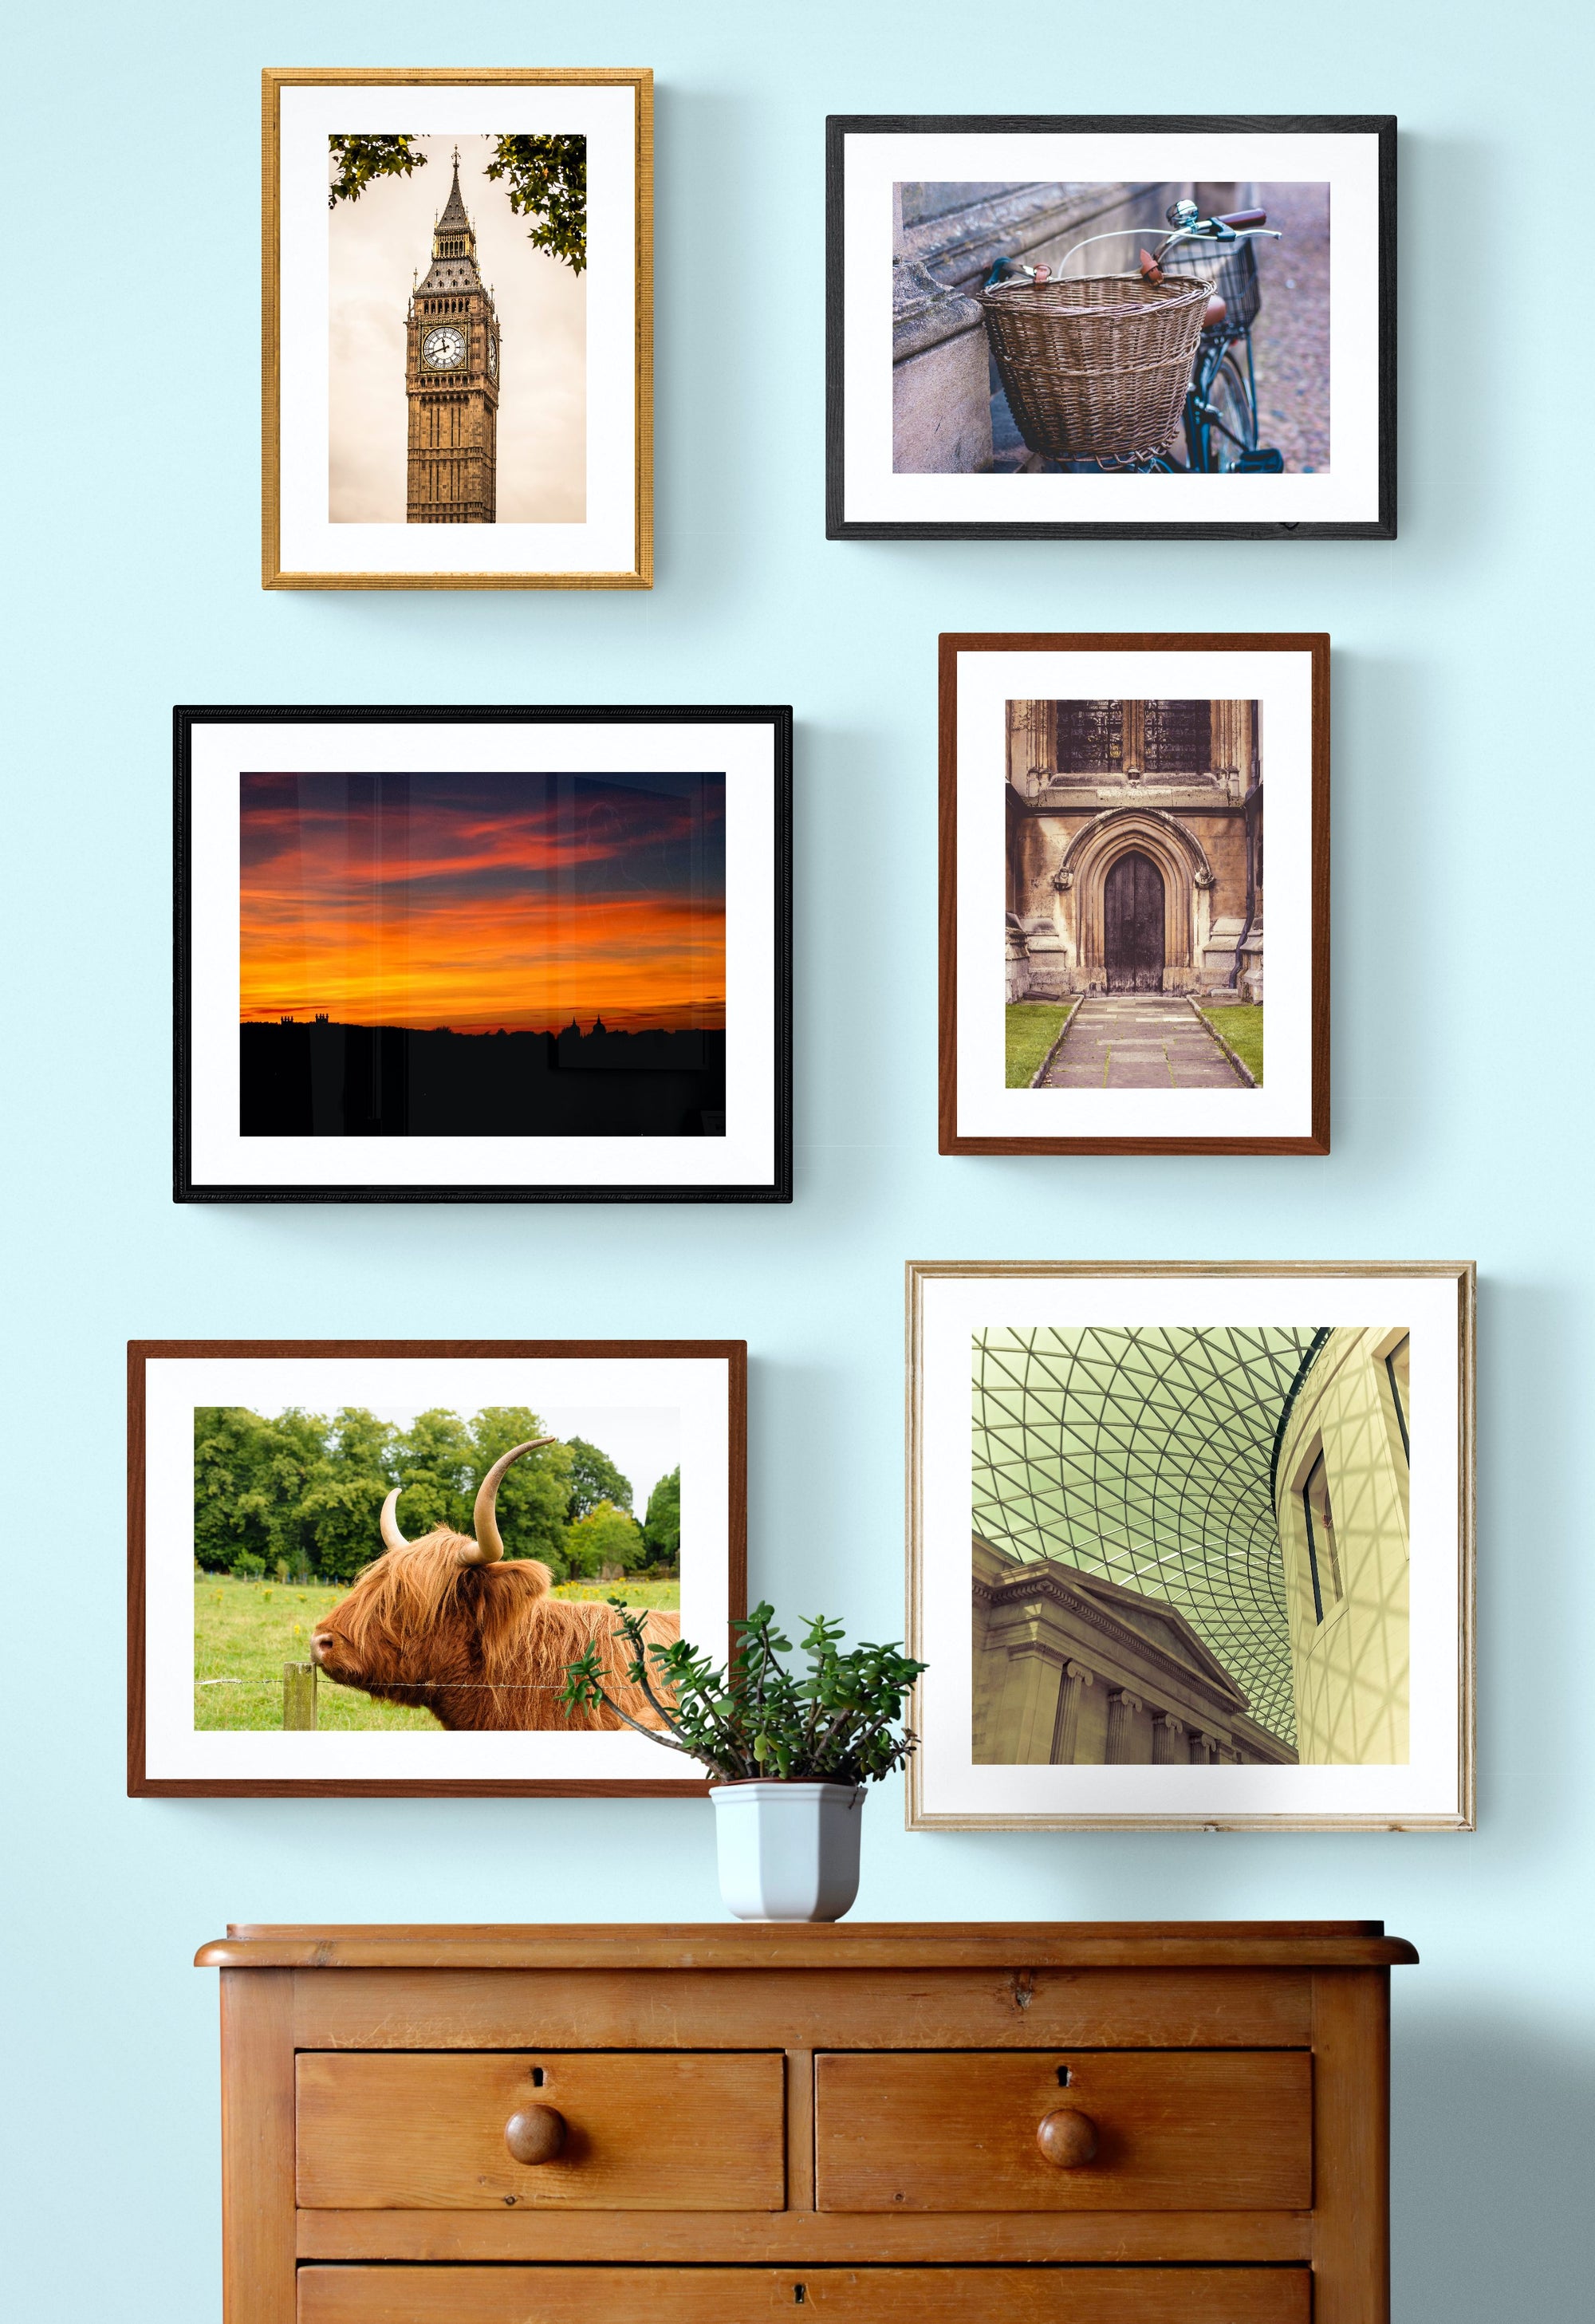 Christi Kraft Photography is Created to order, with prints cut, framed, and assembled by hand. Talented craftspeople take the time and care needed to produce a stunning work of art, just for you.